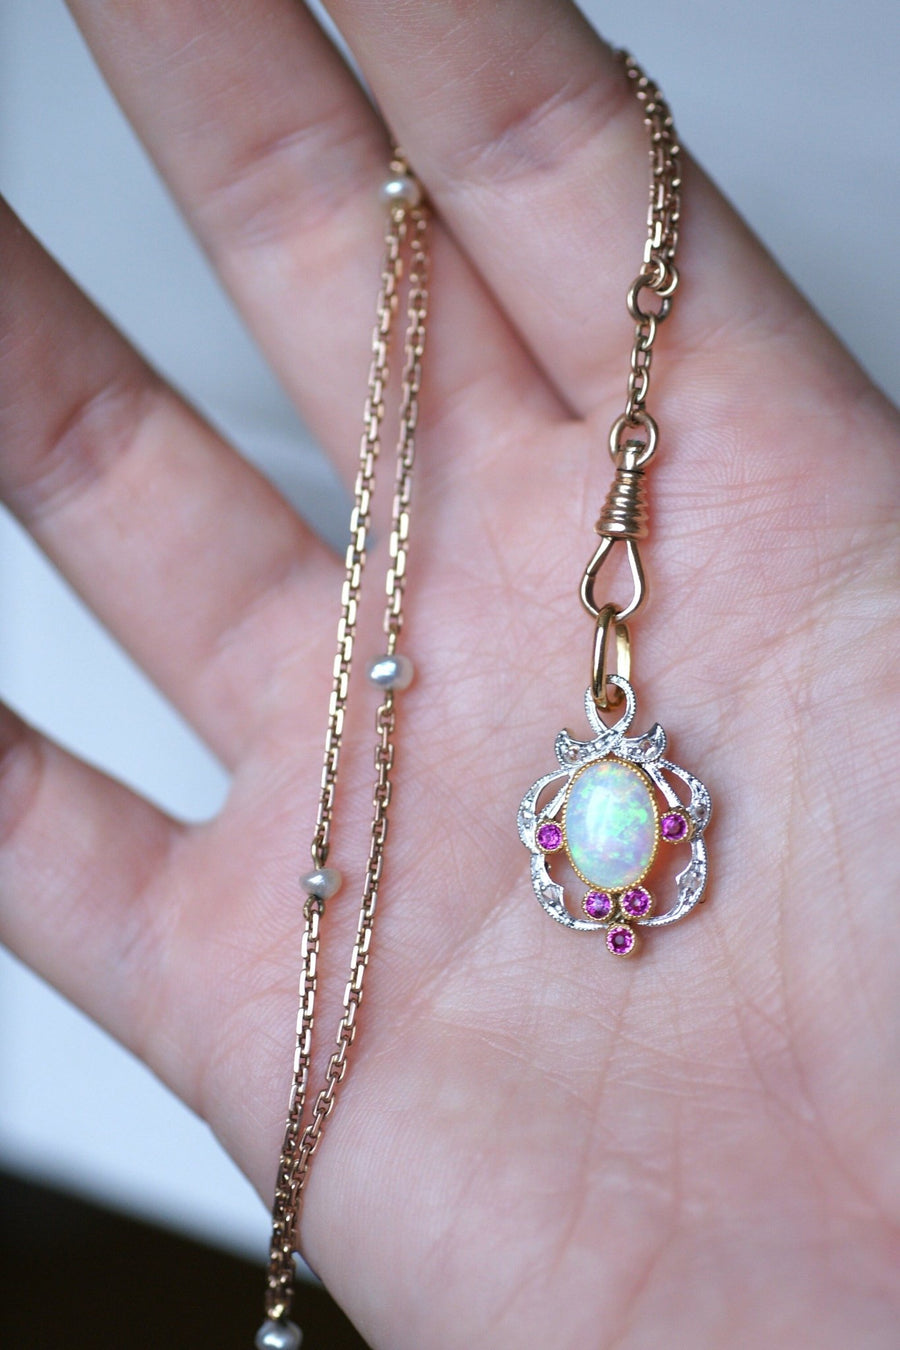 Antique opal pendant with ruby and diamonds - Penelope Gallery